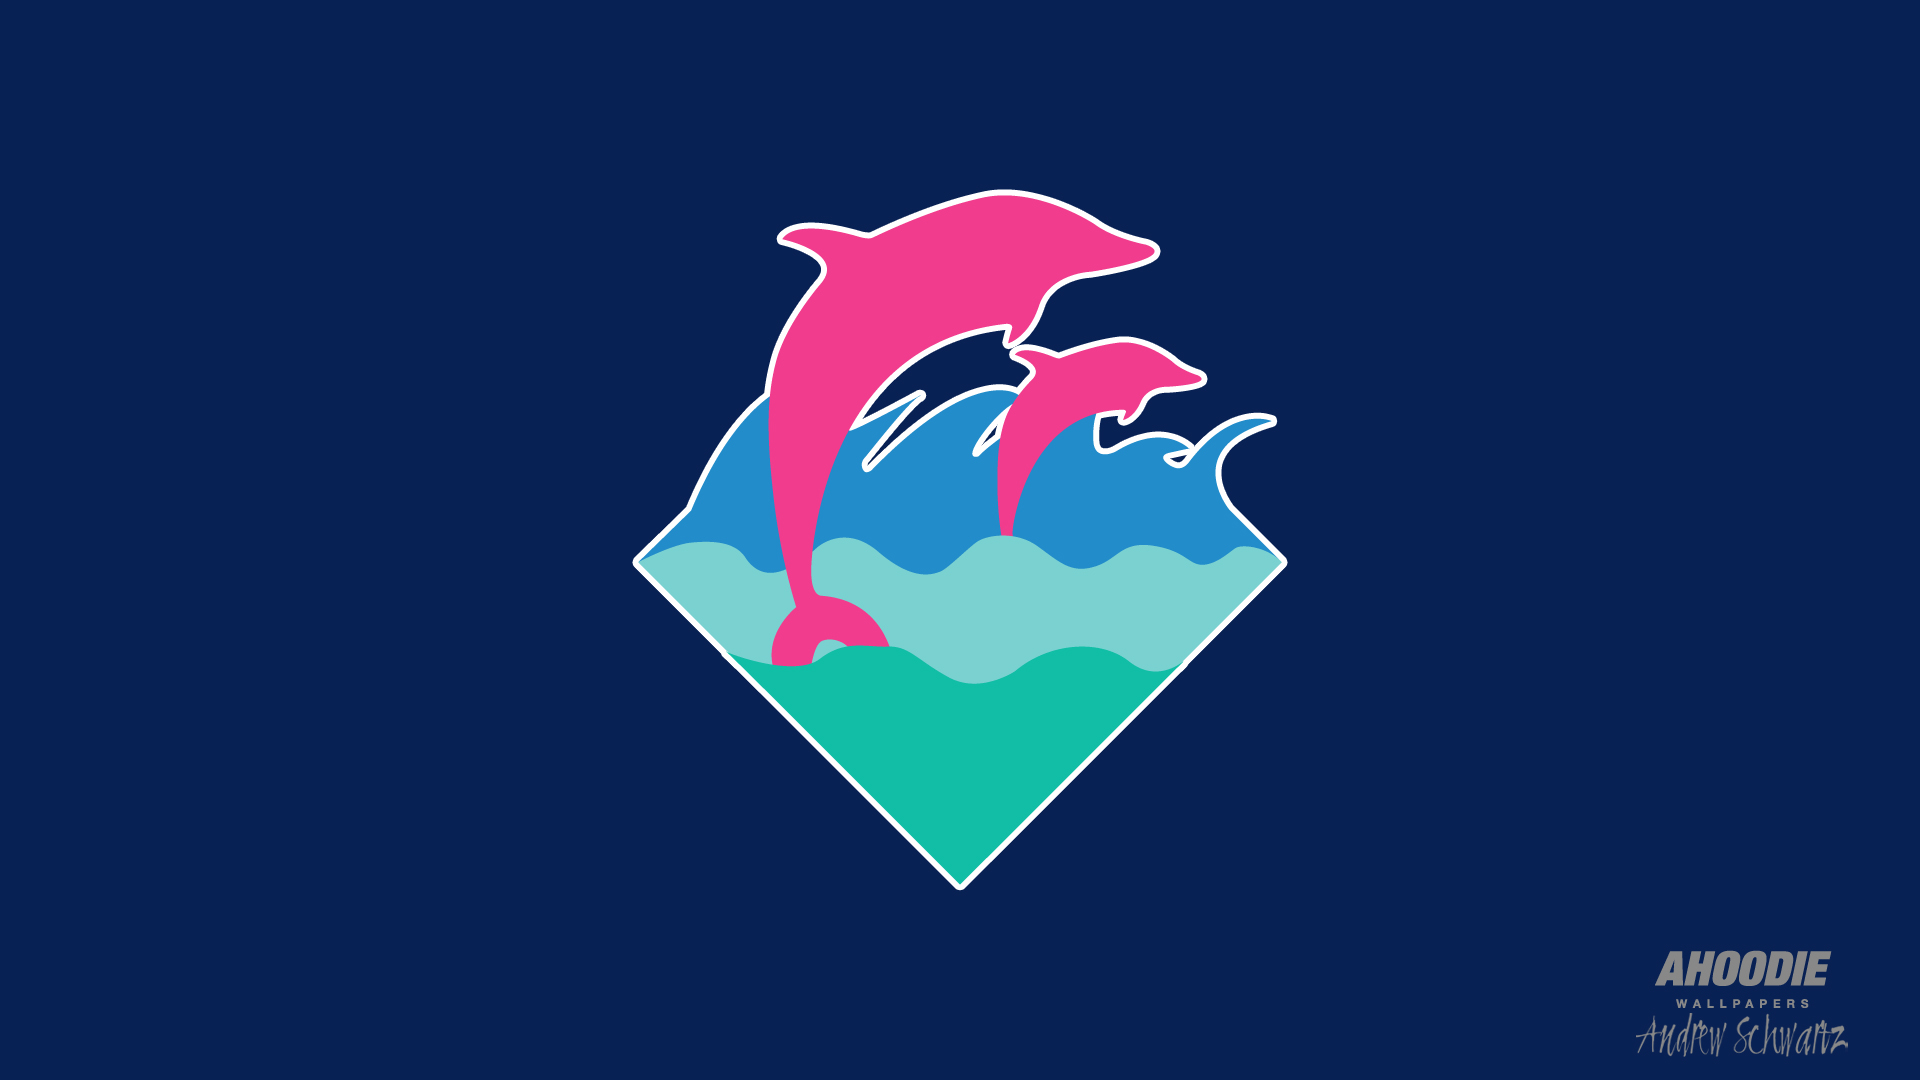 pinkdolphin 1 300x168 NEW WALLPAPERS  PINK DOLPHIN BACKGROUNDS